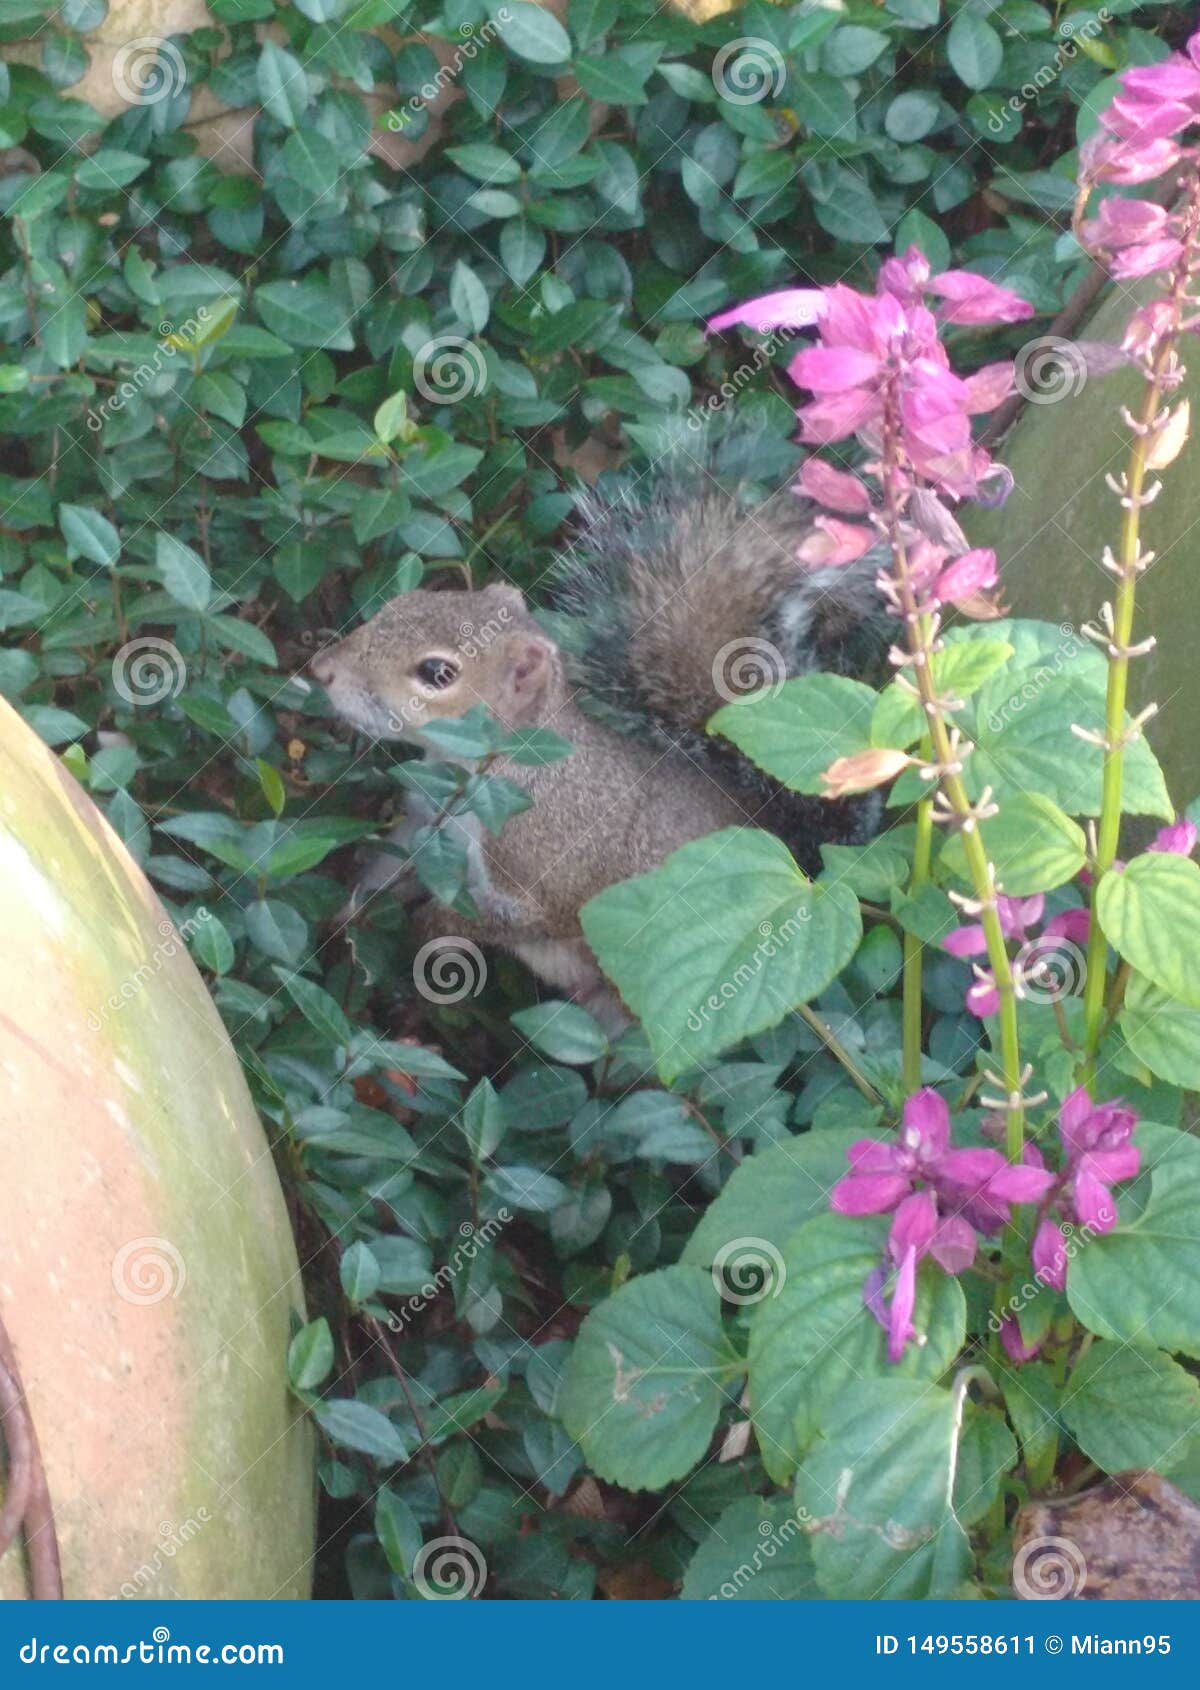 a curious squirrel, posing among the flowers